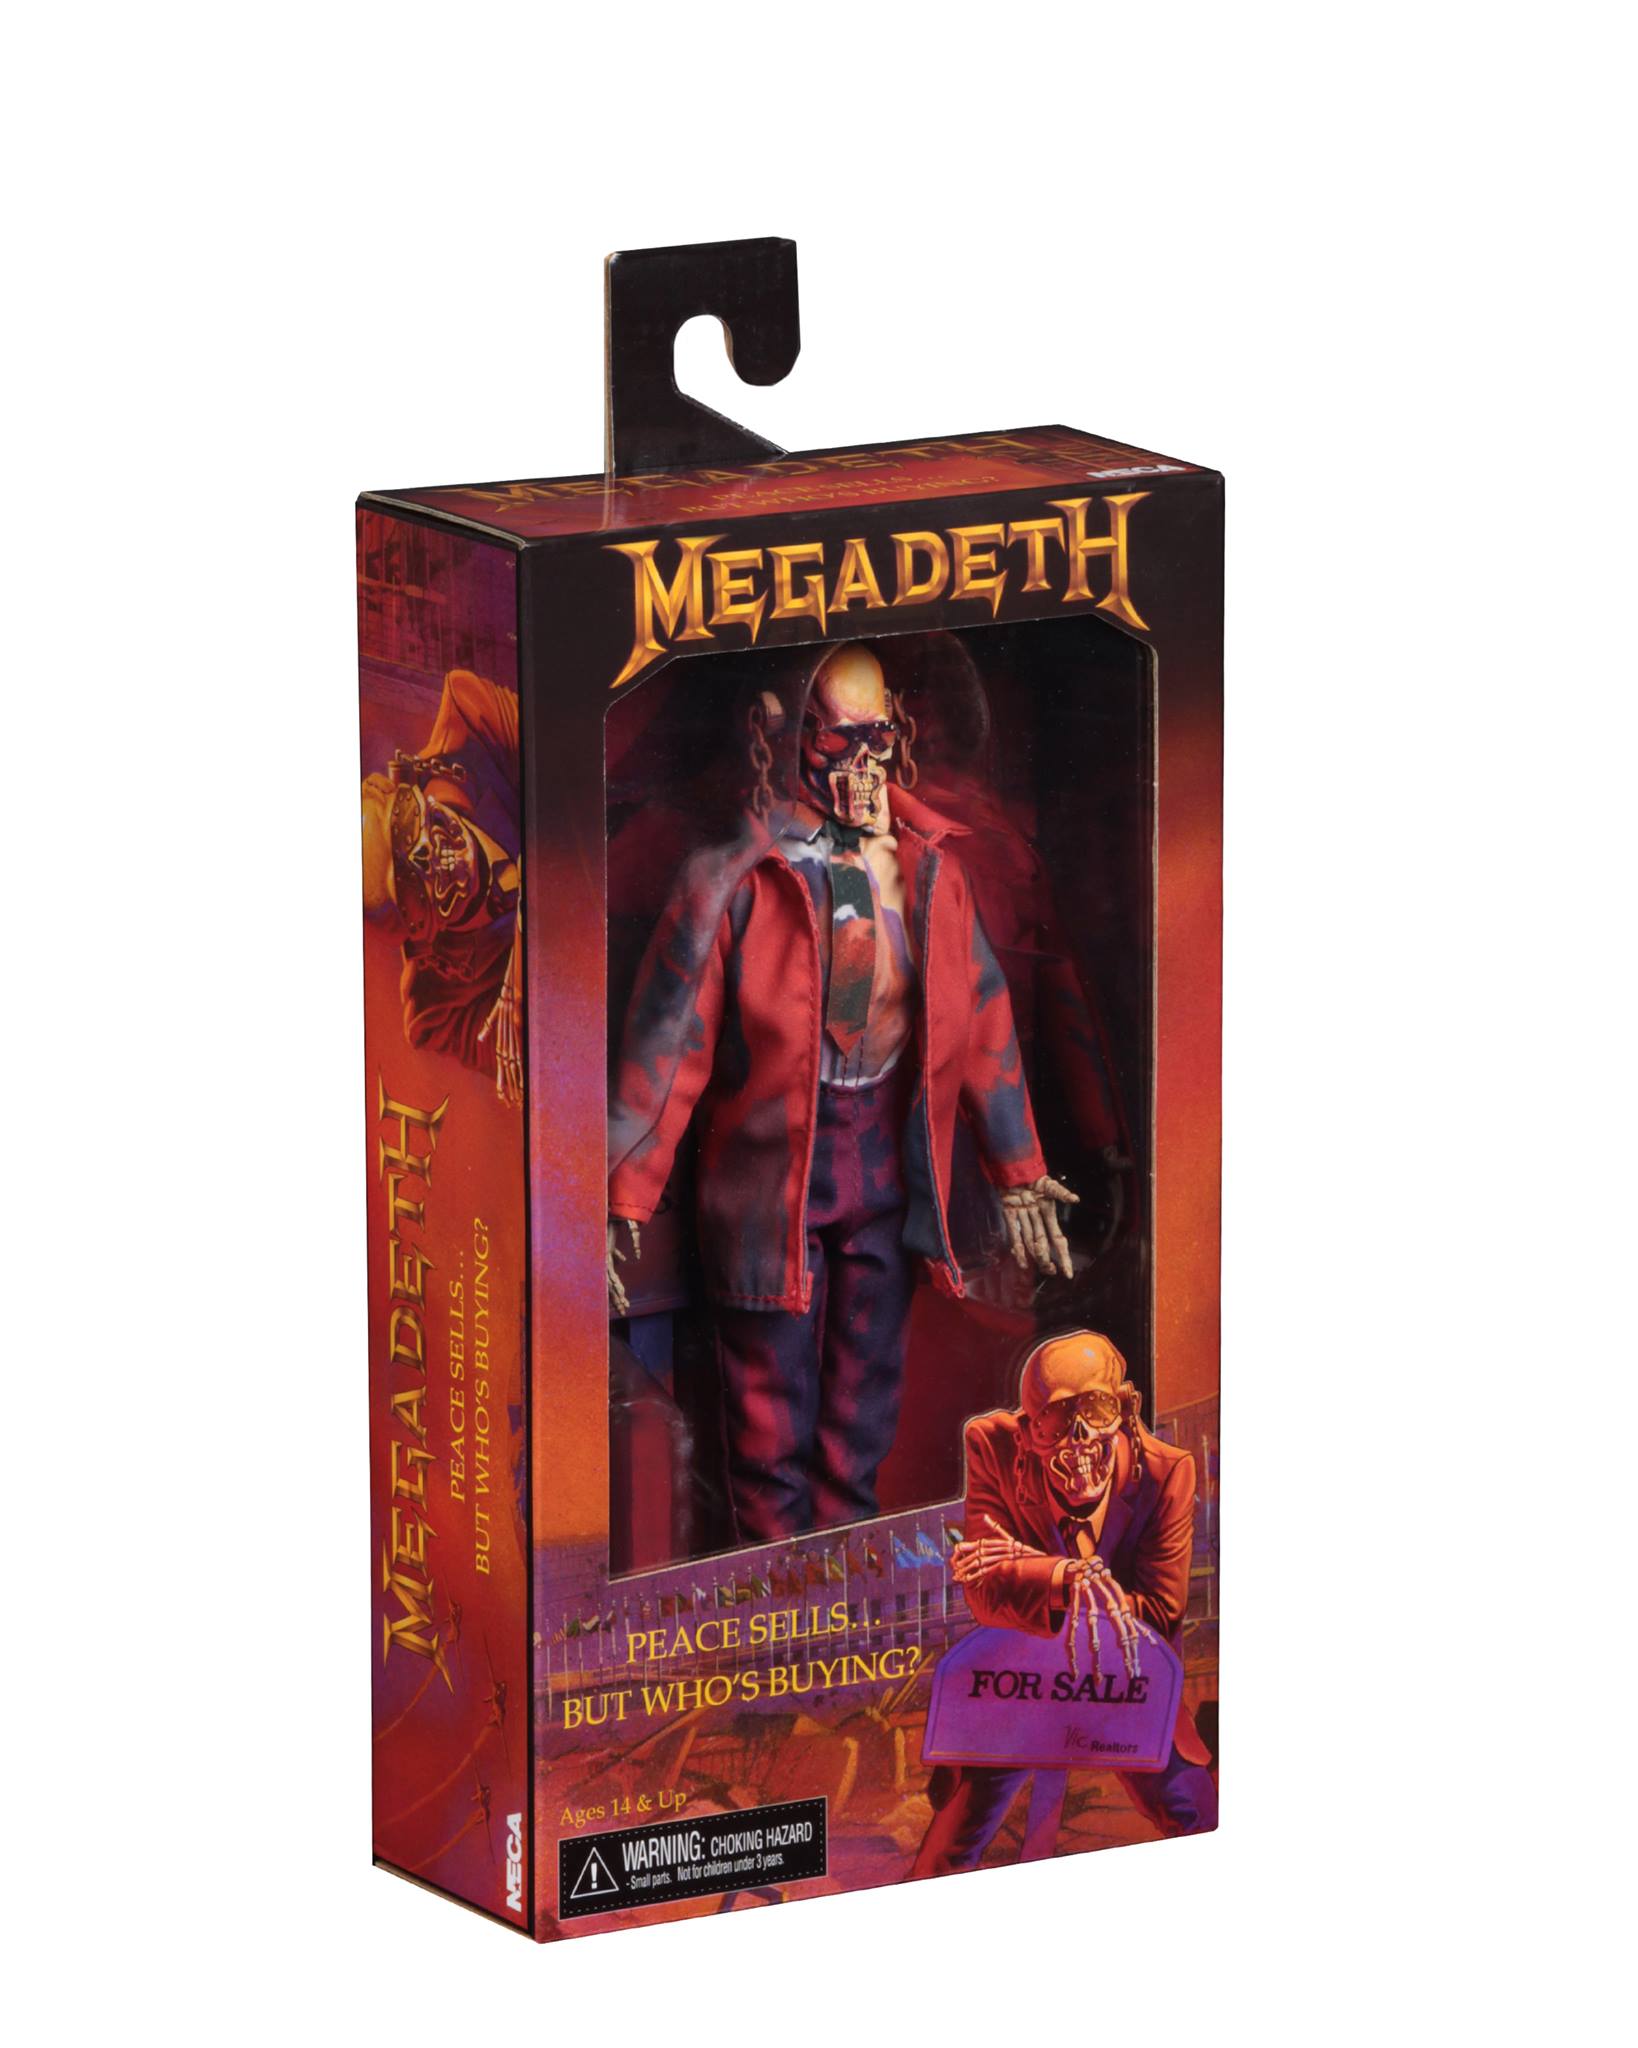 NECA's Megadeth “Peace Sells… But Who's Buying?” Vic Rattlehead